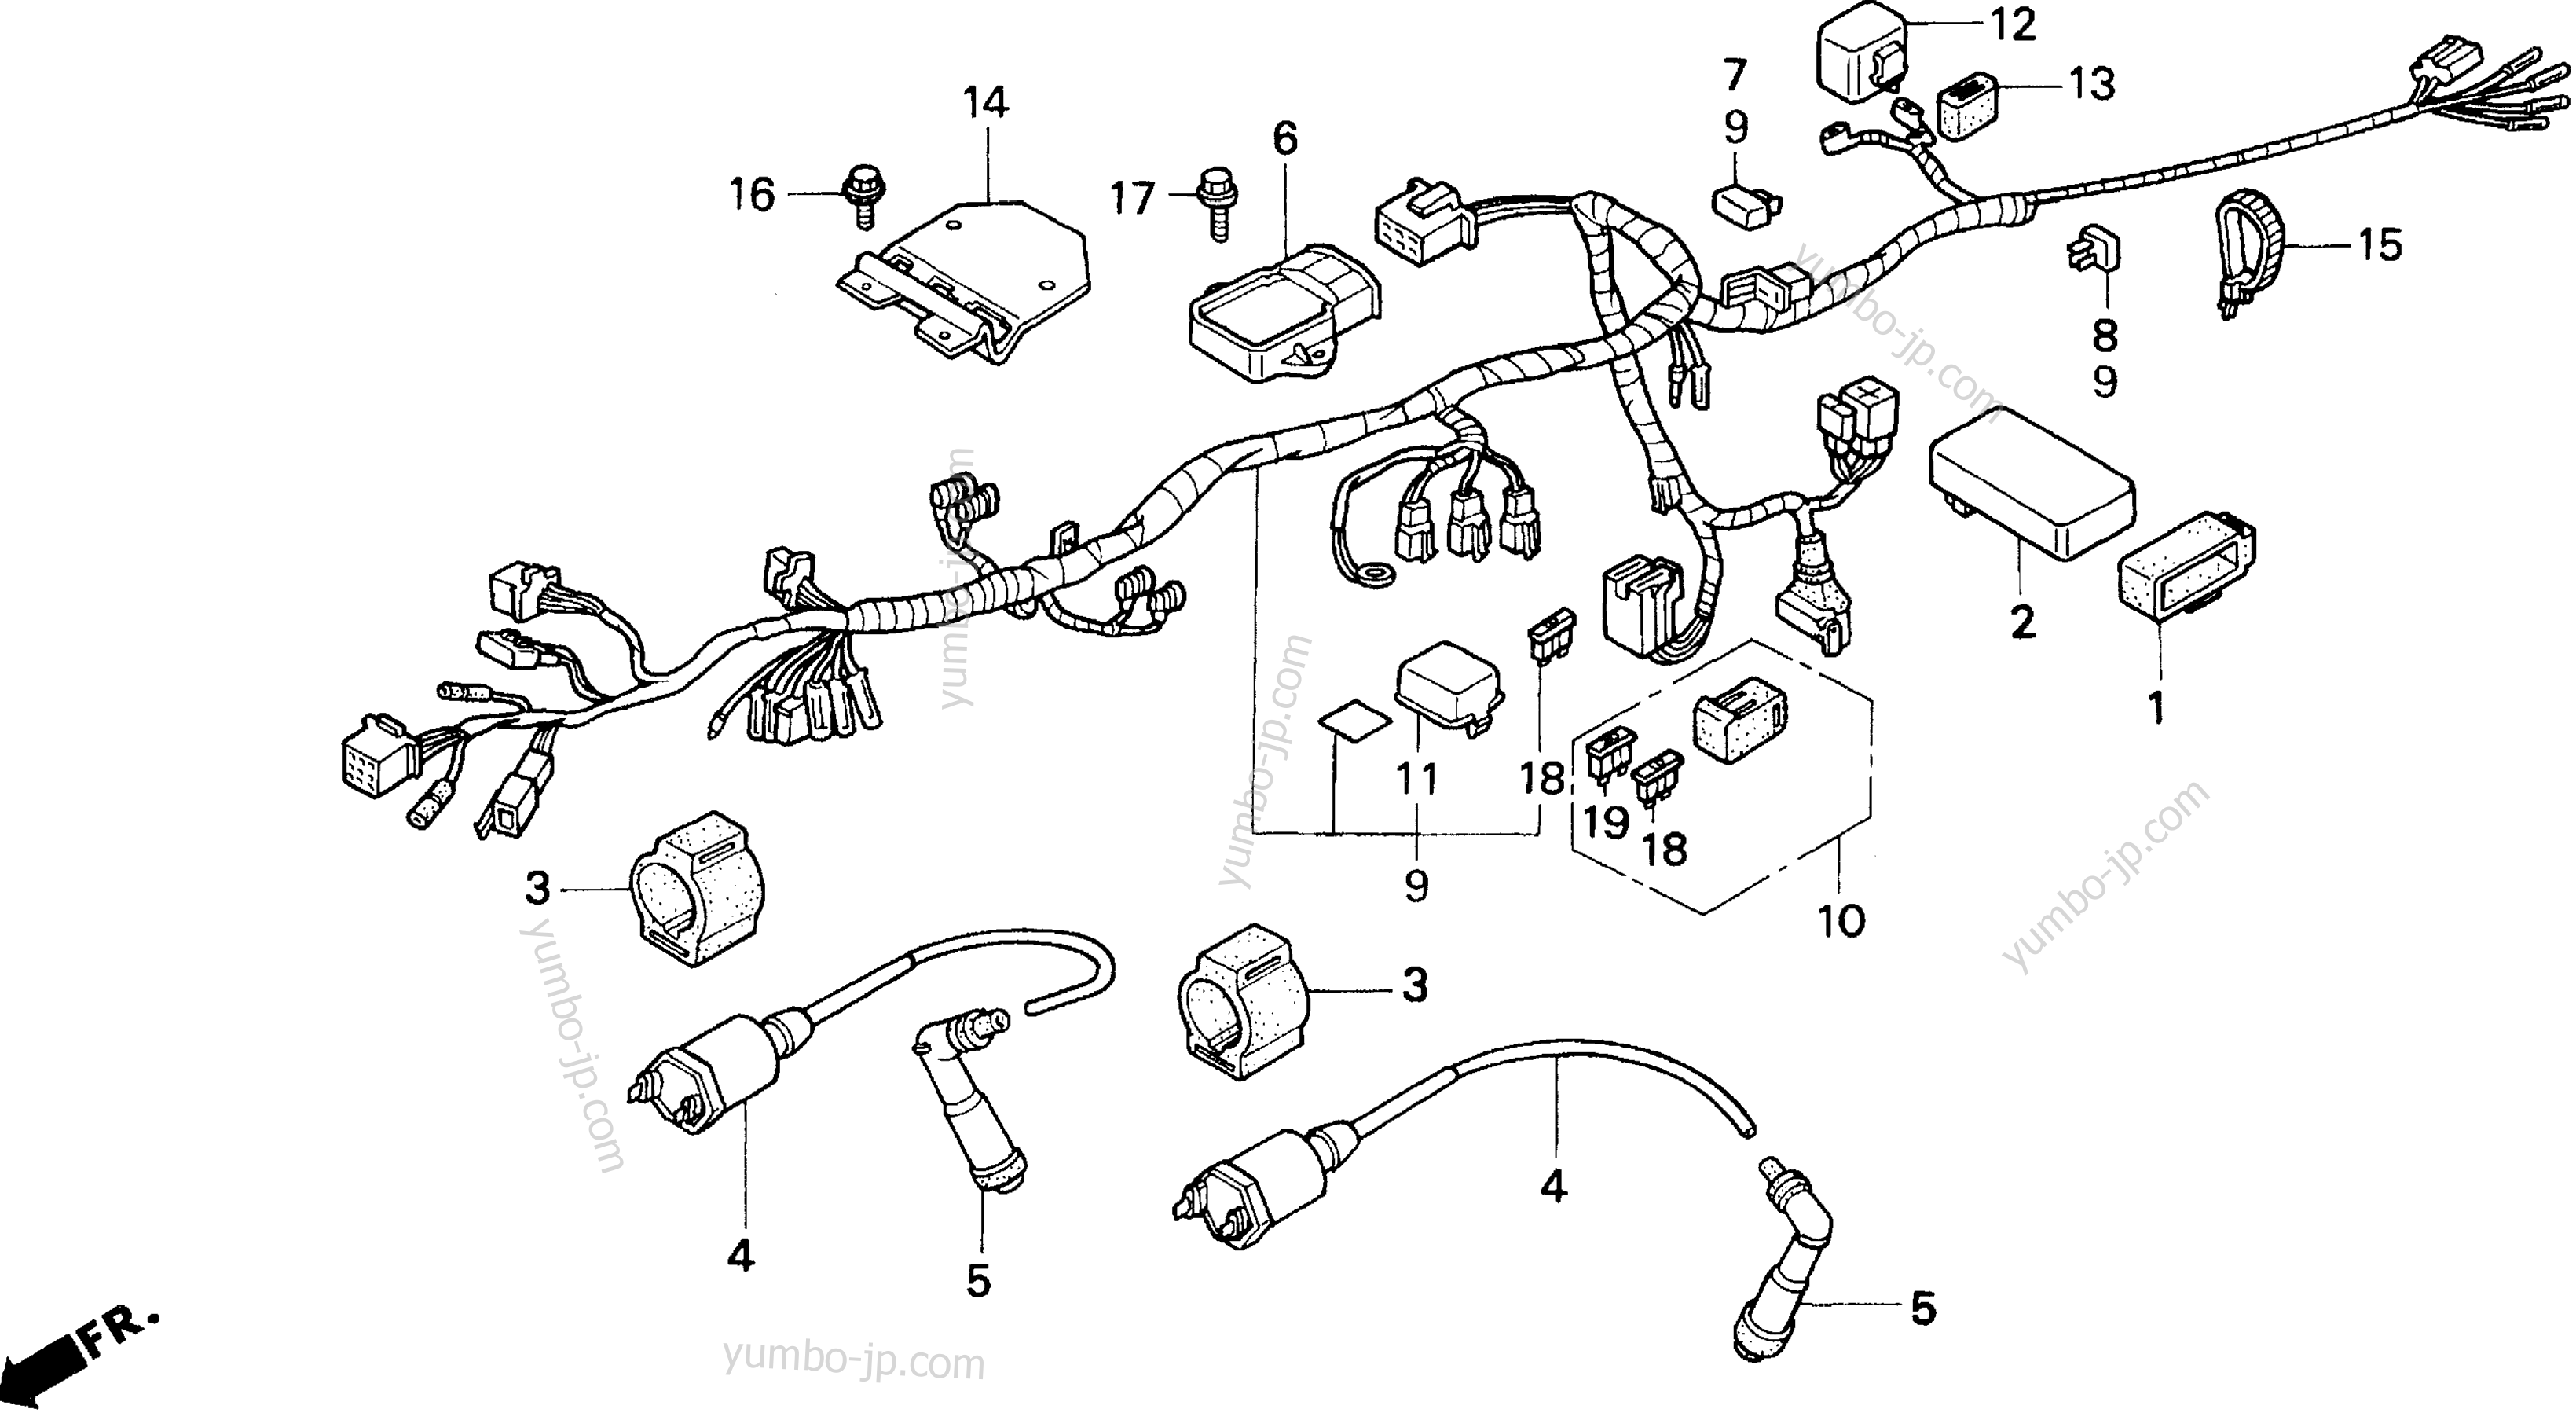 WIRE HARNESS for motorcycles HONDA CB250 A 1996 year